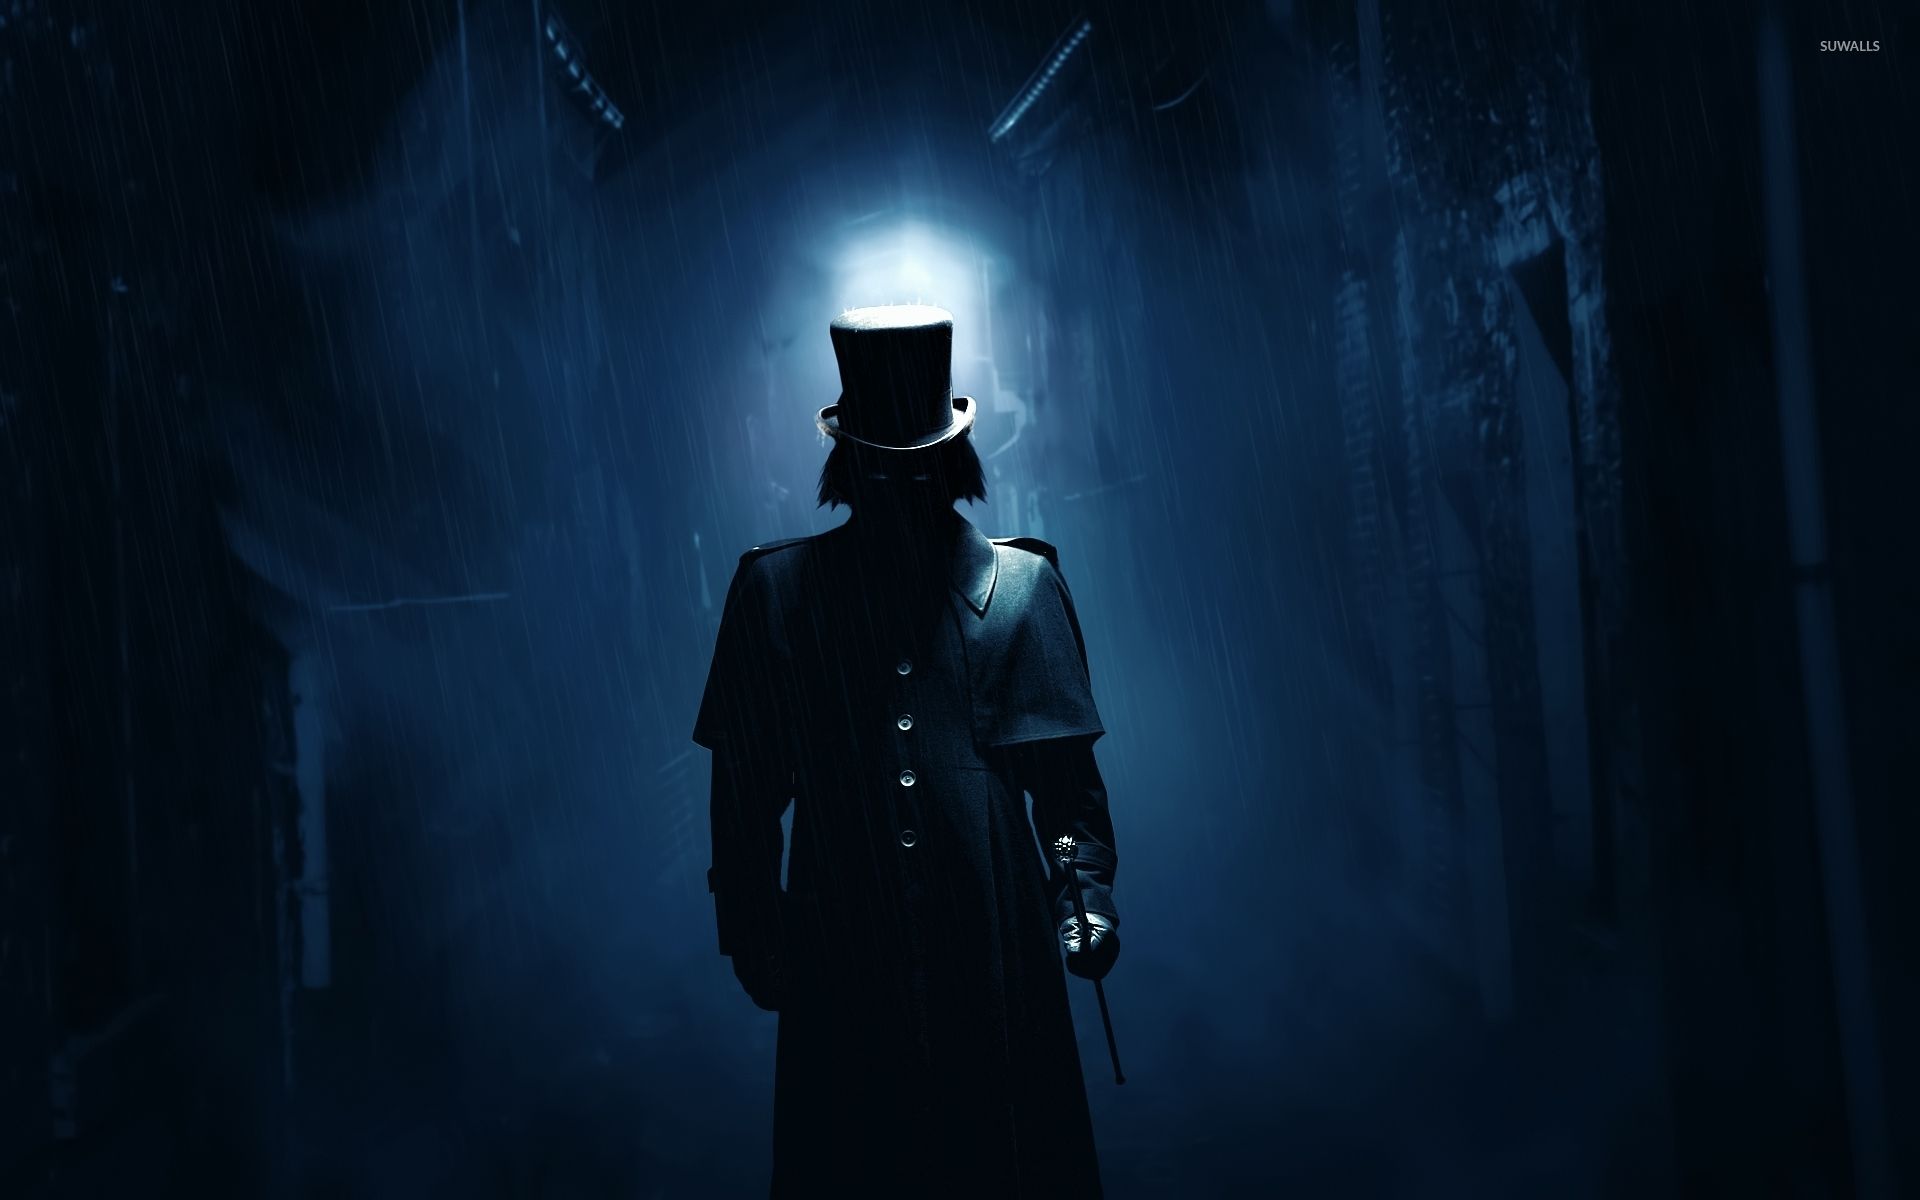 Dark image with man dressed in top hat walking toward the light